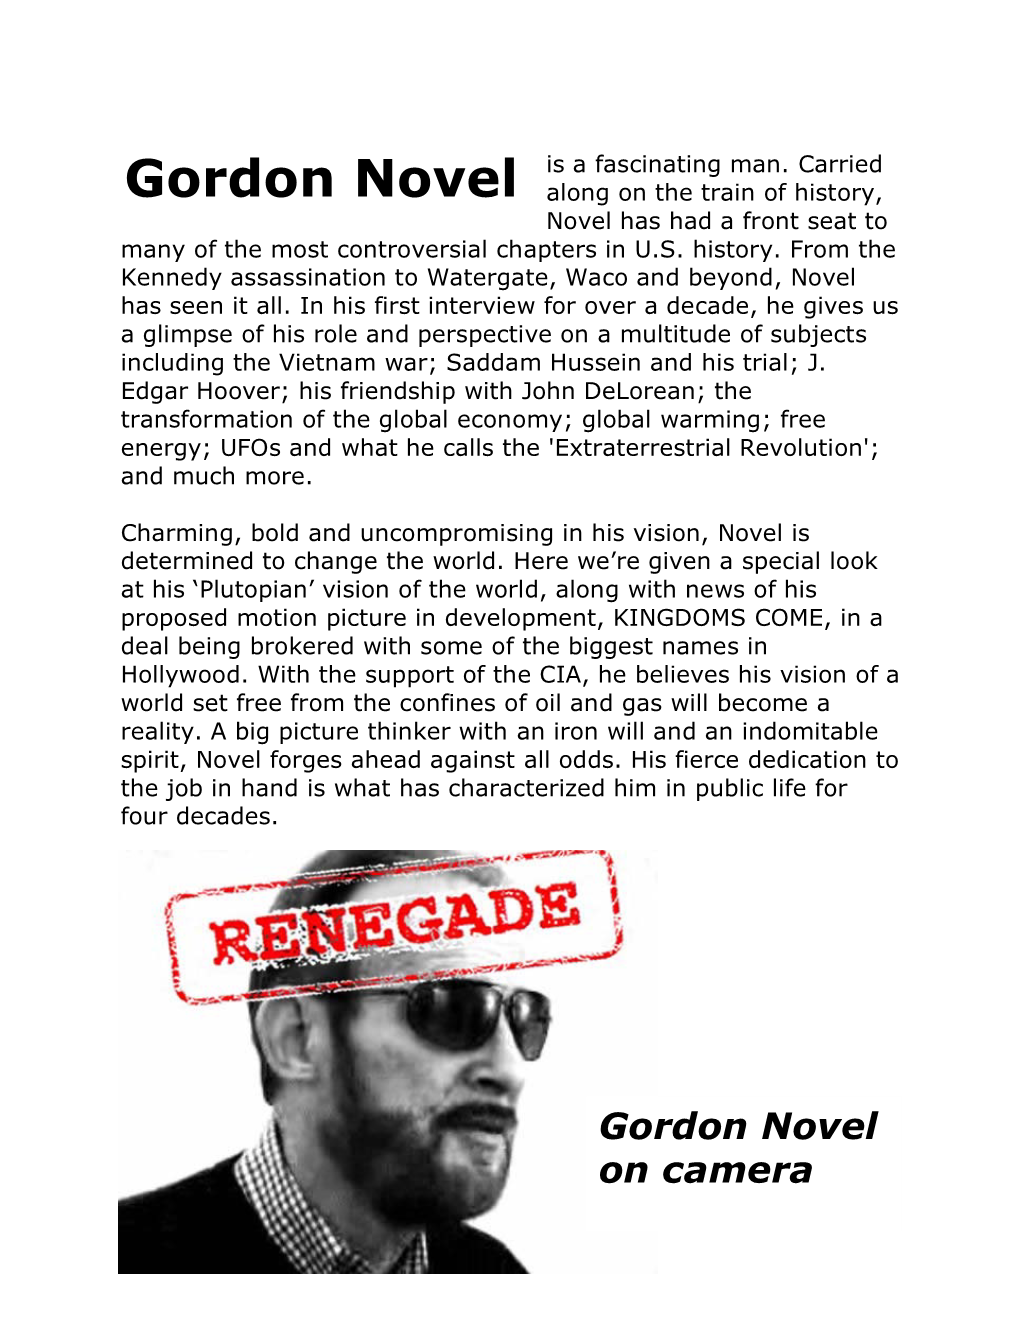 Gordon Novel Along on the Train of History, Novel Has Had a Front Seat to Many of the Most Controversial Chapters in U.S